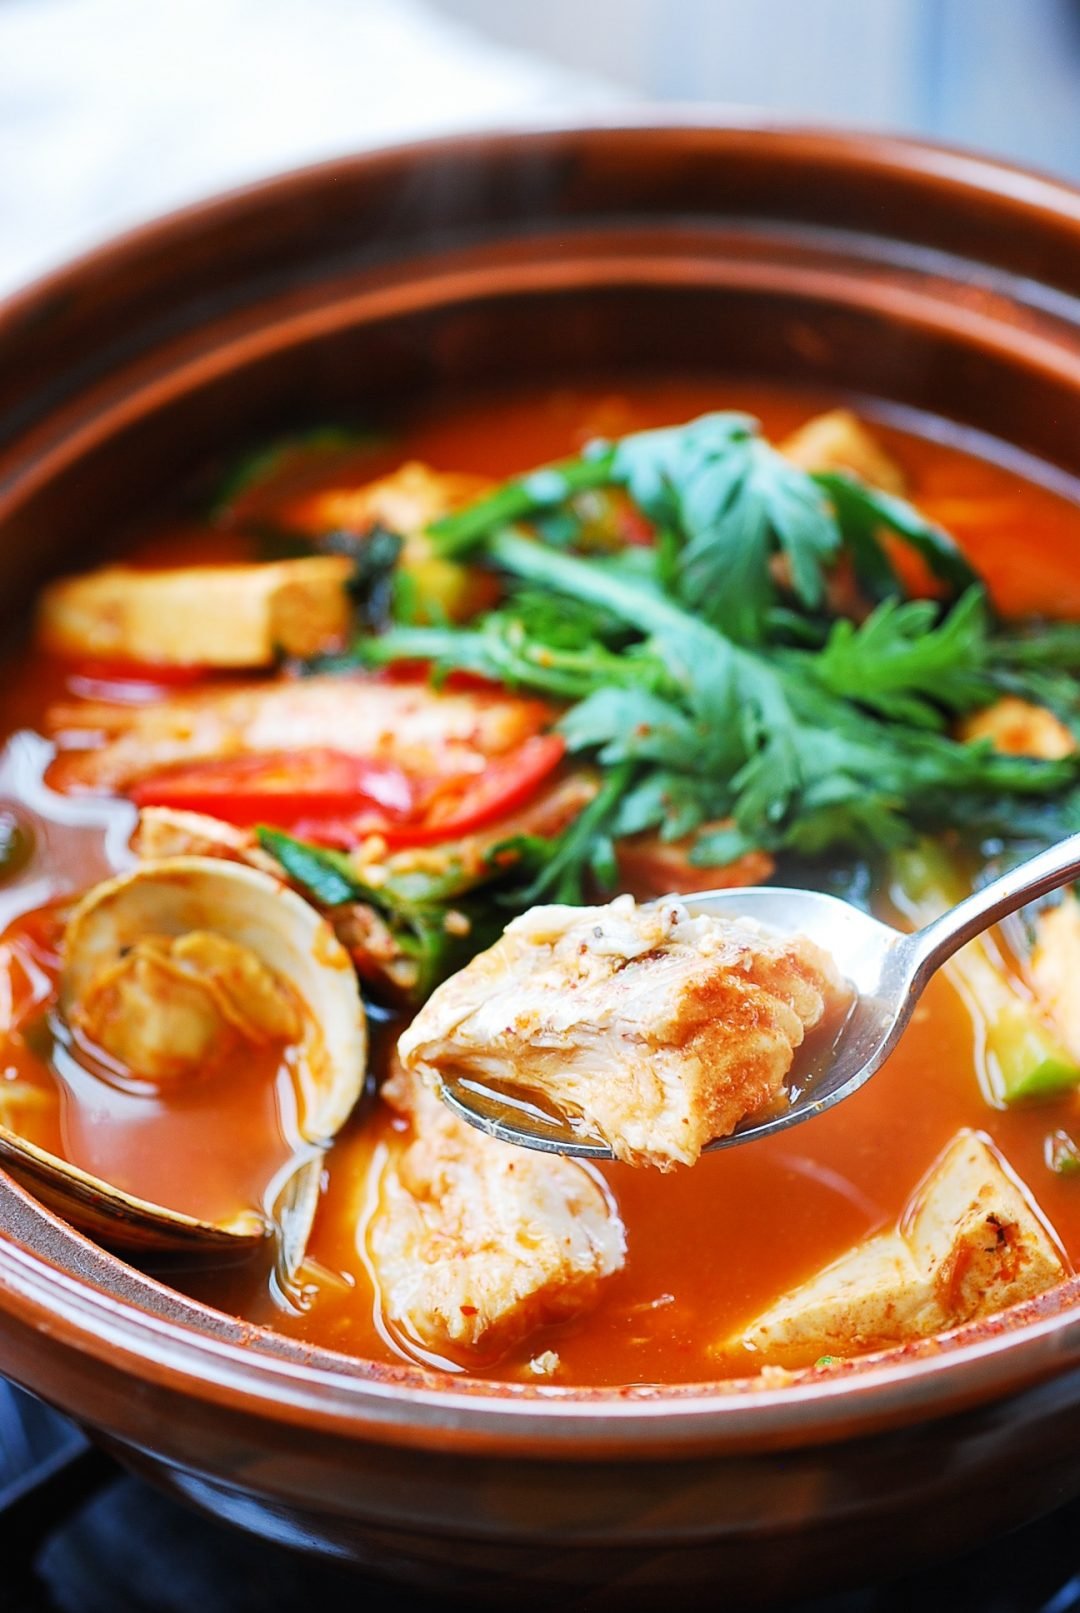 DSC 2725 2 e1613456389474 - Domi Maeuntang (Spicy Fish Stew with Red Snapper)